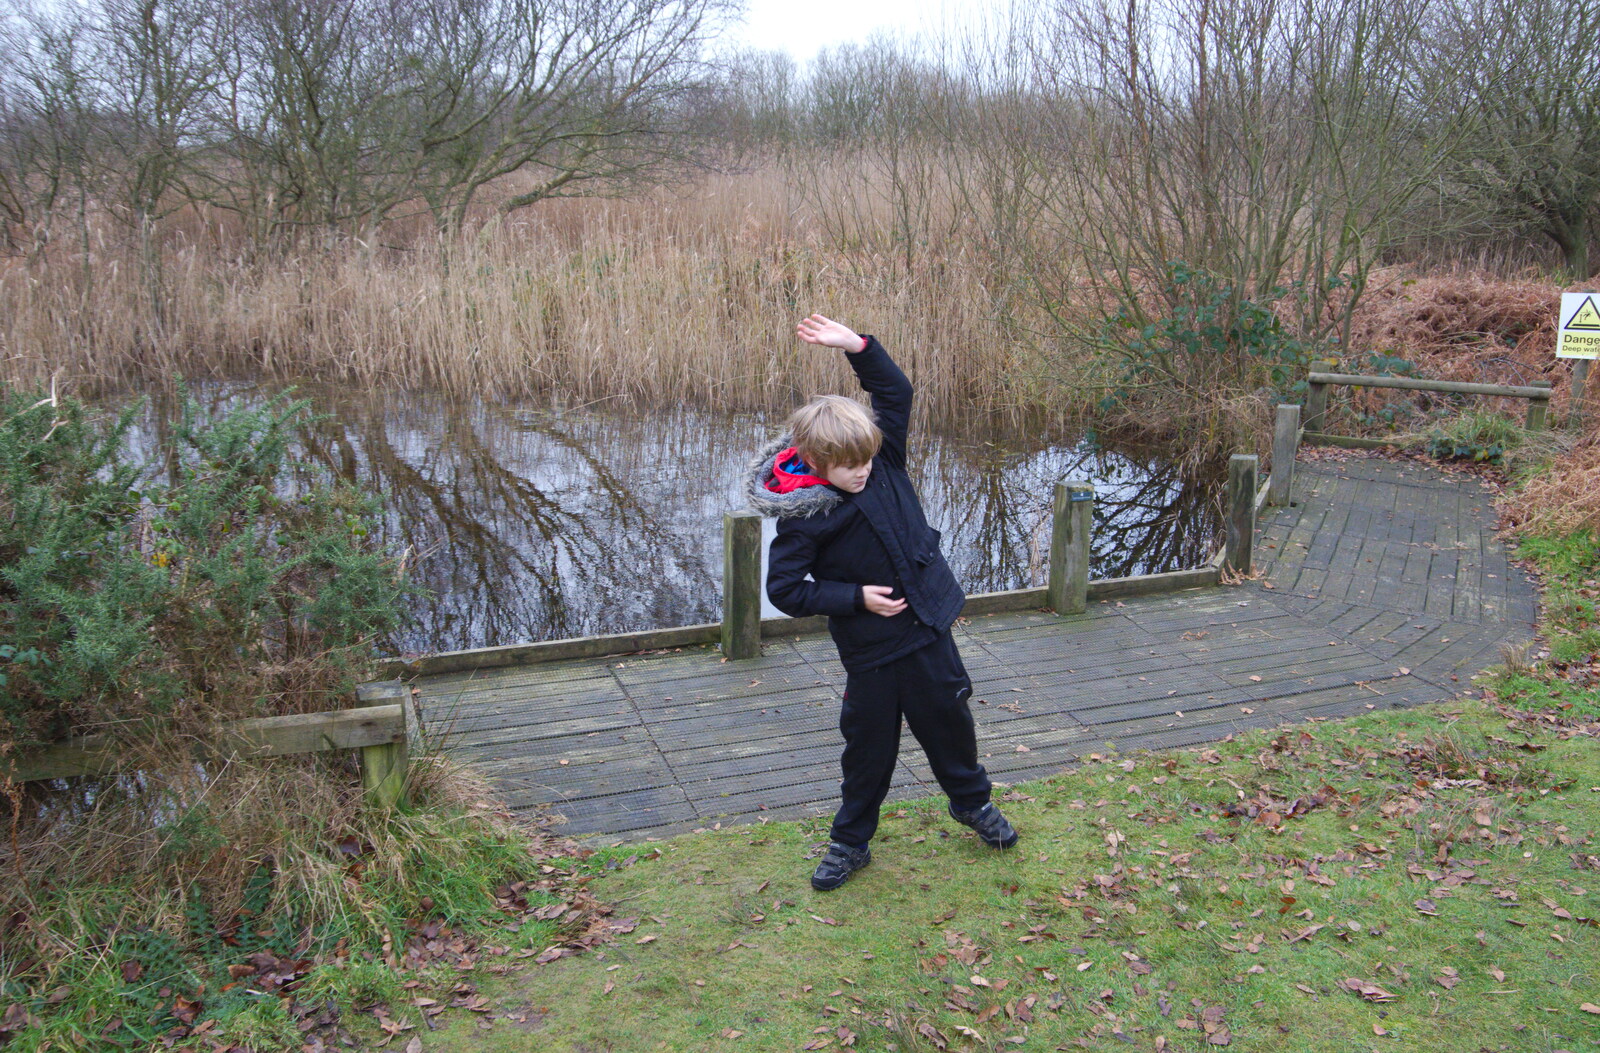 Harry does some Ninja moves from A Trip to the Beach, Dunwich Heath, Suffolk - 27th December 2019